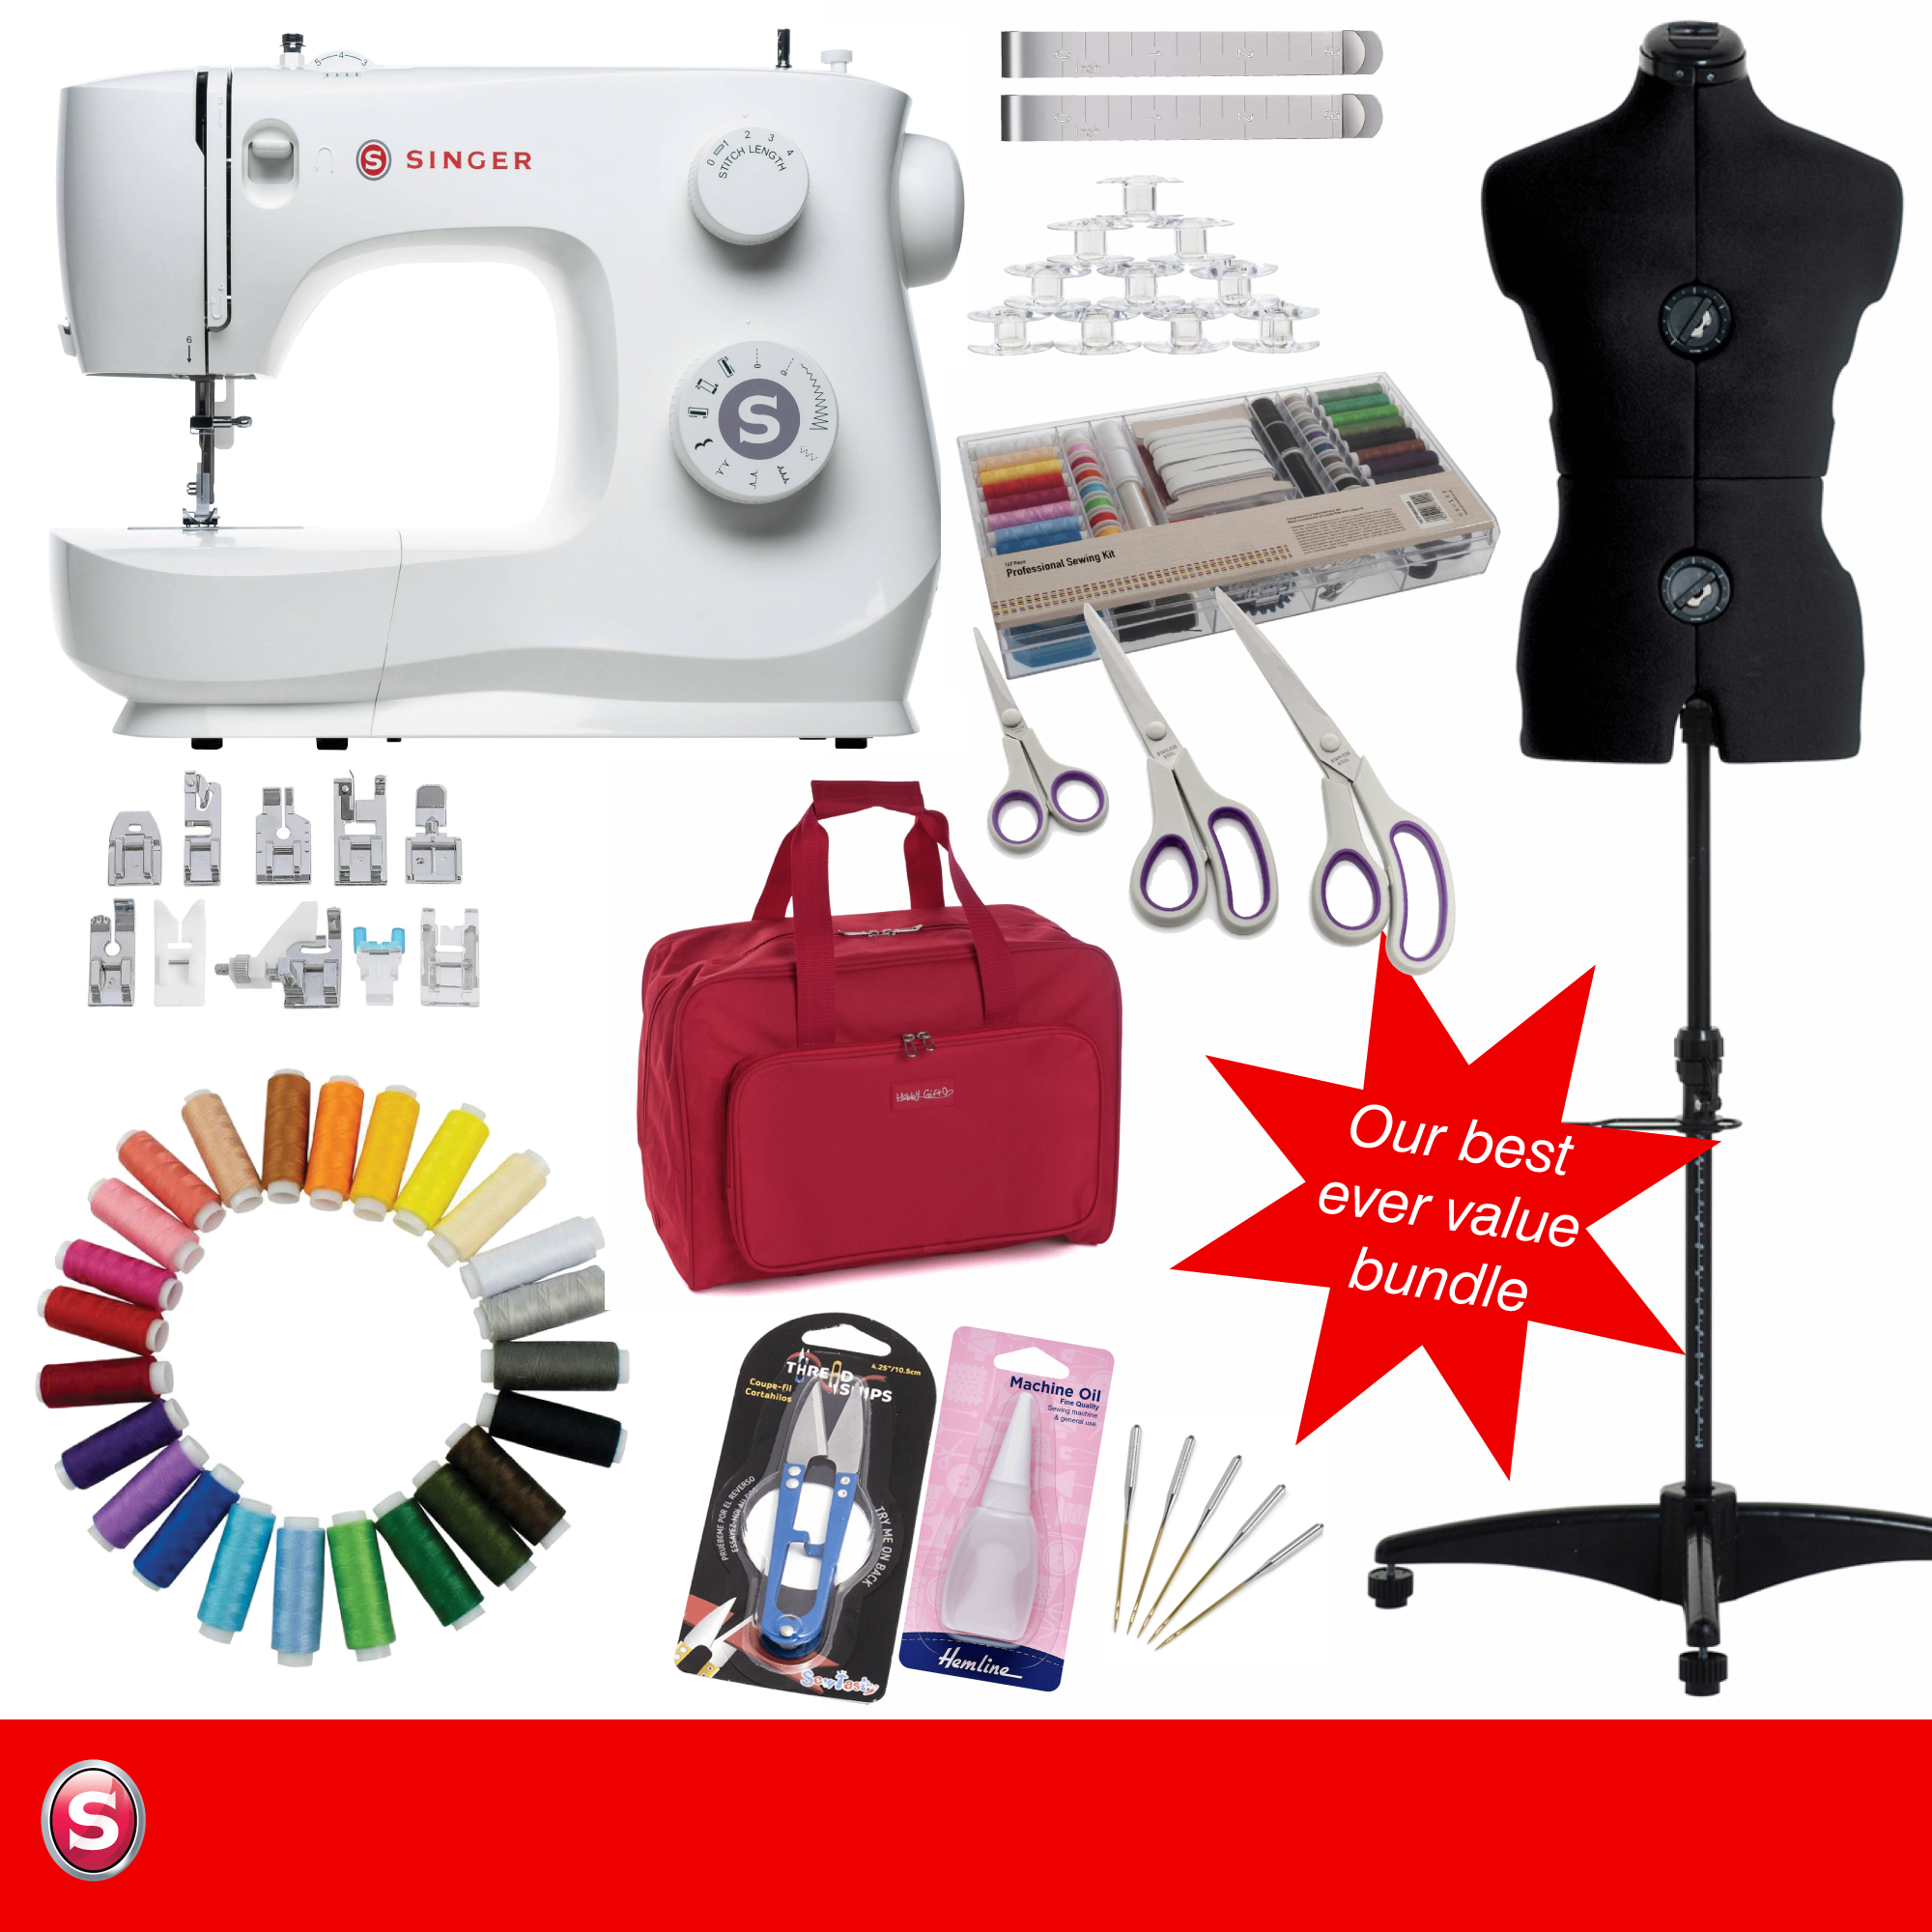 Singer Sewing Room Bundle - Sewing Machine, Mannequin and